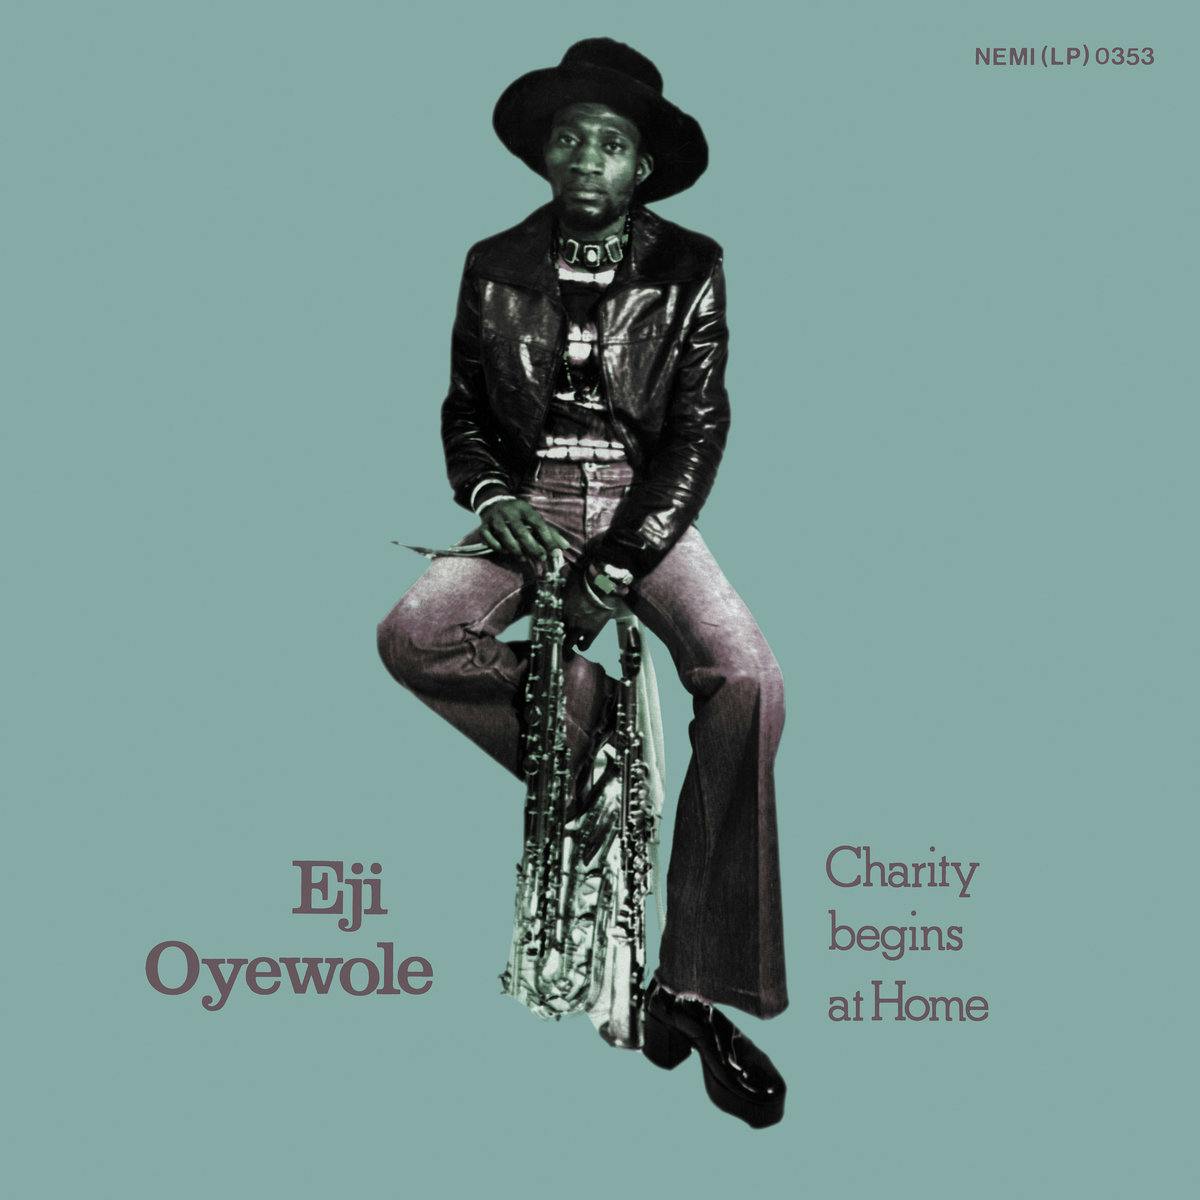 We are proud to present a set of edits of this long-lost classic from the golden age of African music, from a figure who is still beginning to get his props internationally, Eji Oyewole.